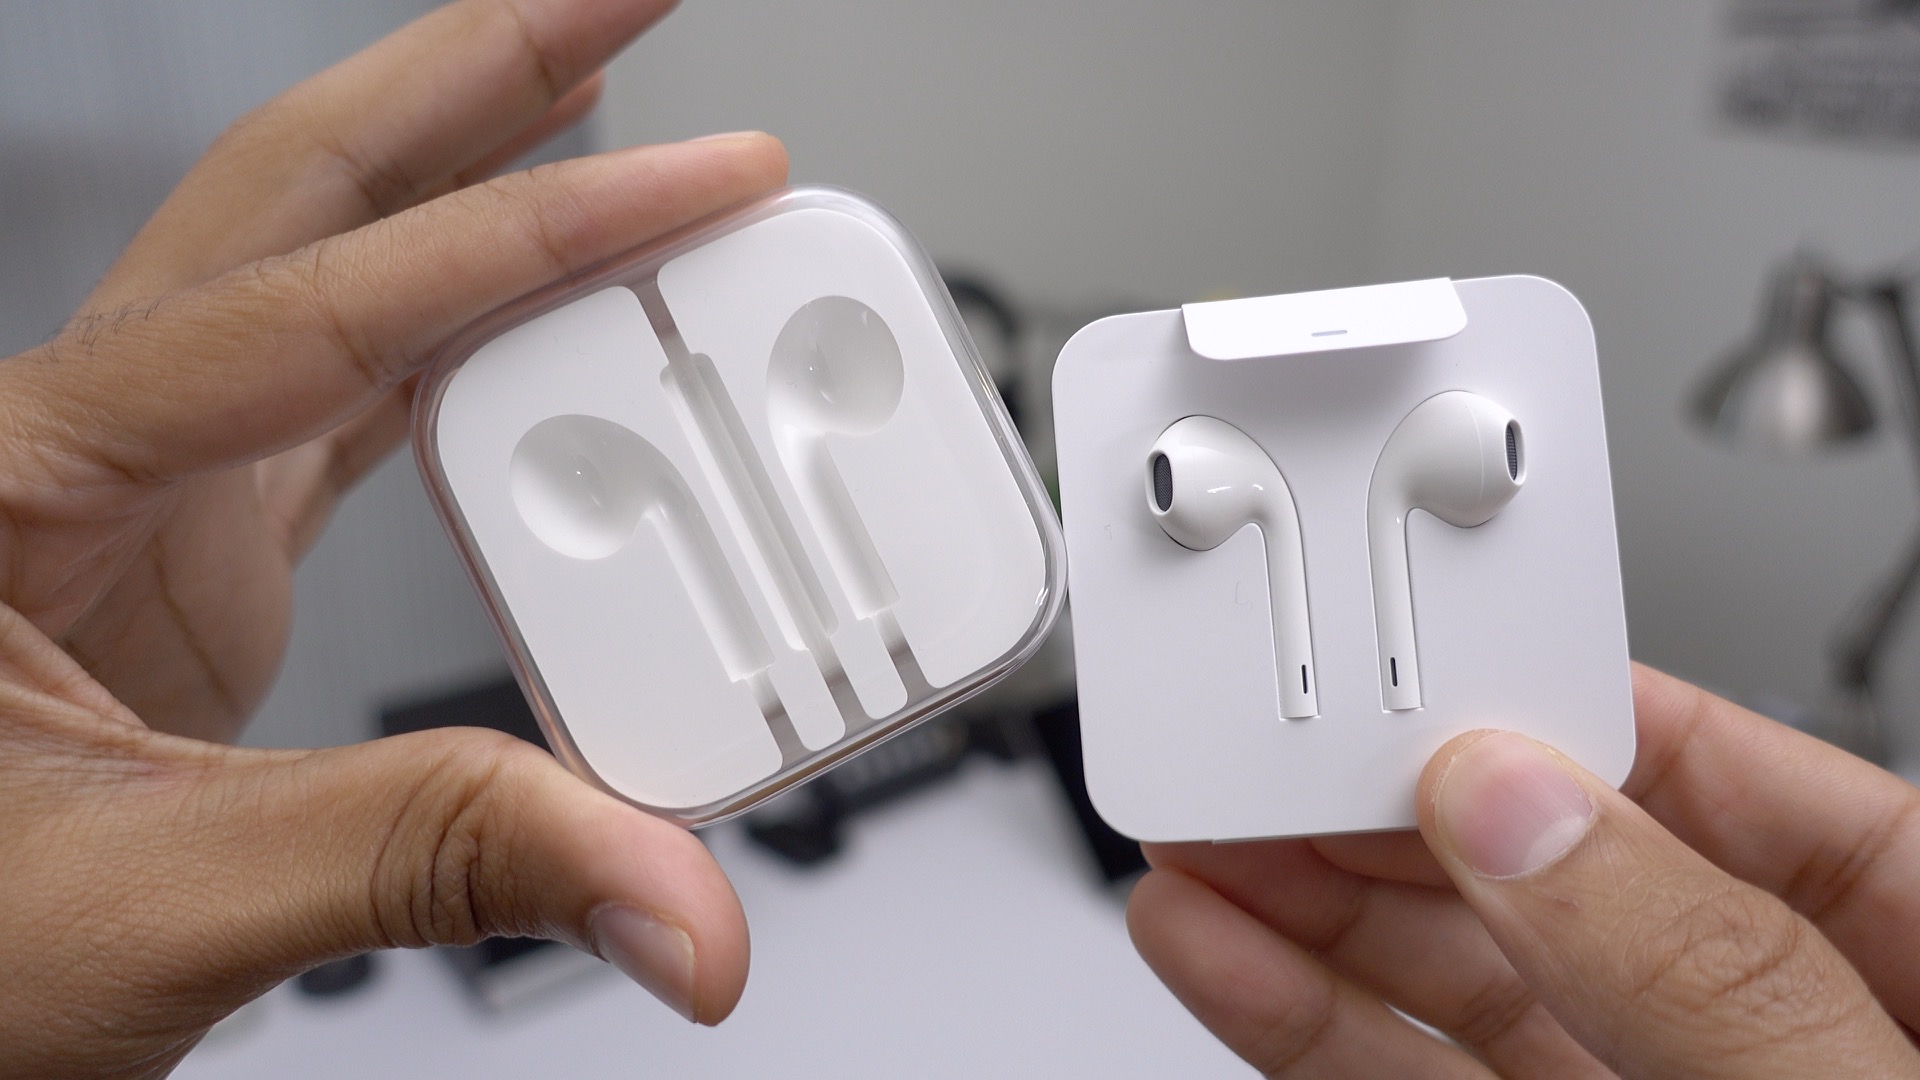 Hands-on: How the new Lightning EarPods compare to the old 3.5mm EarPods  [Video] - 9to5Mac